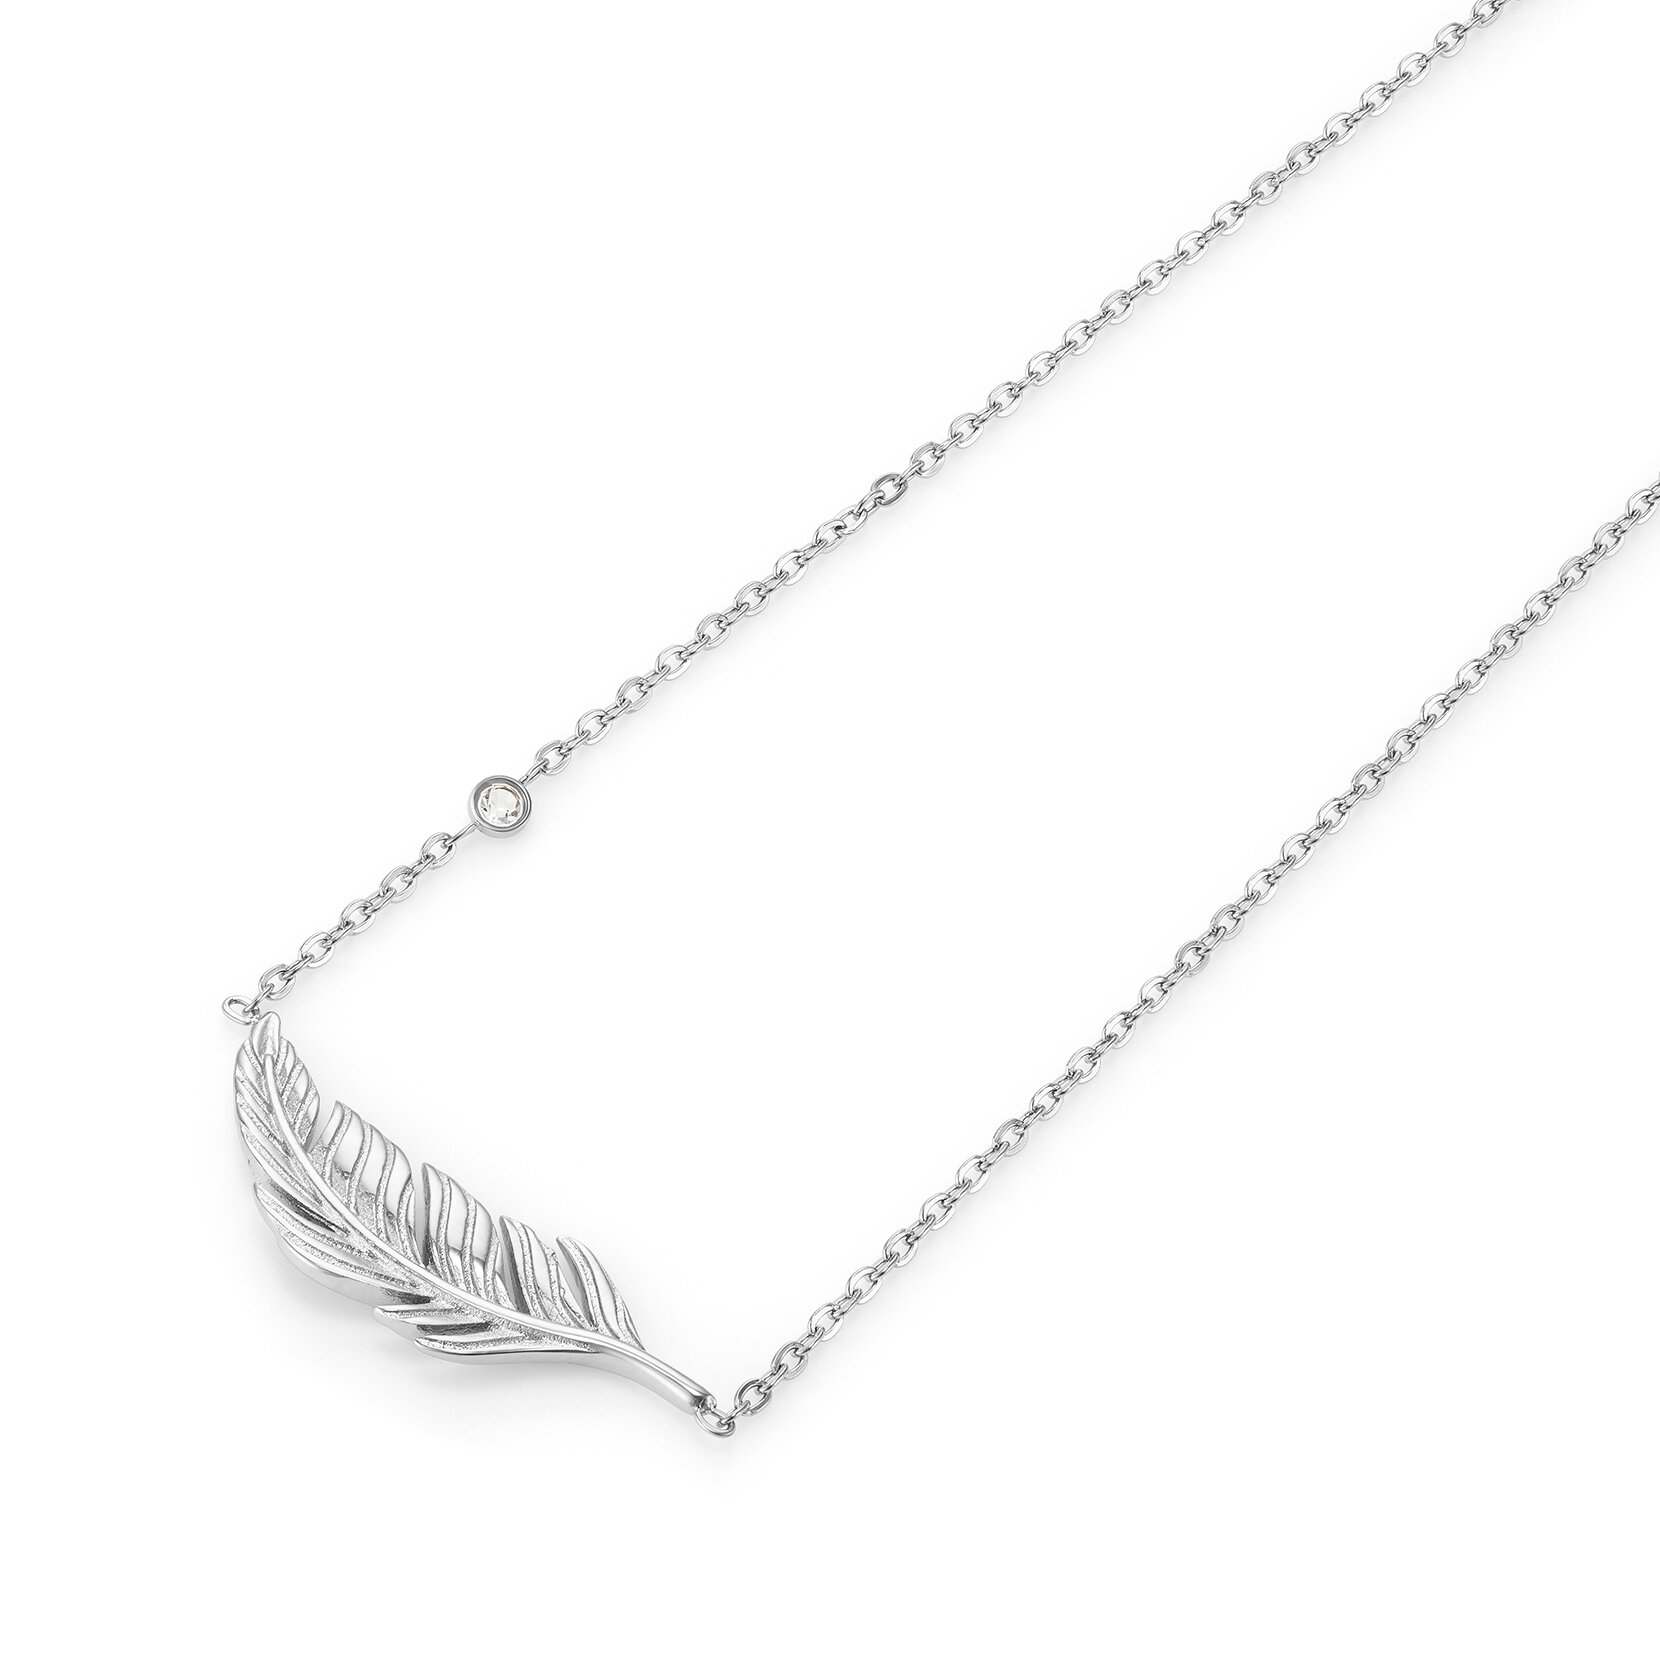 Feather Silver Tone Necklace